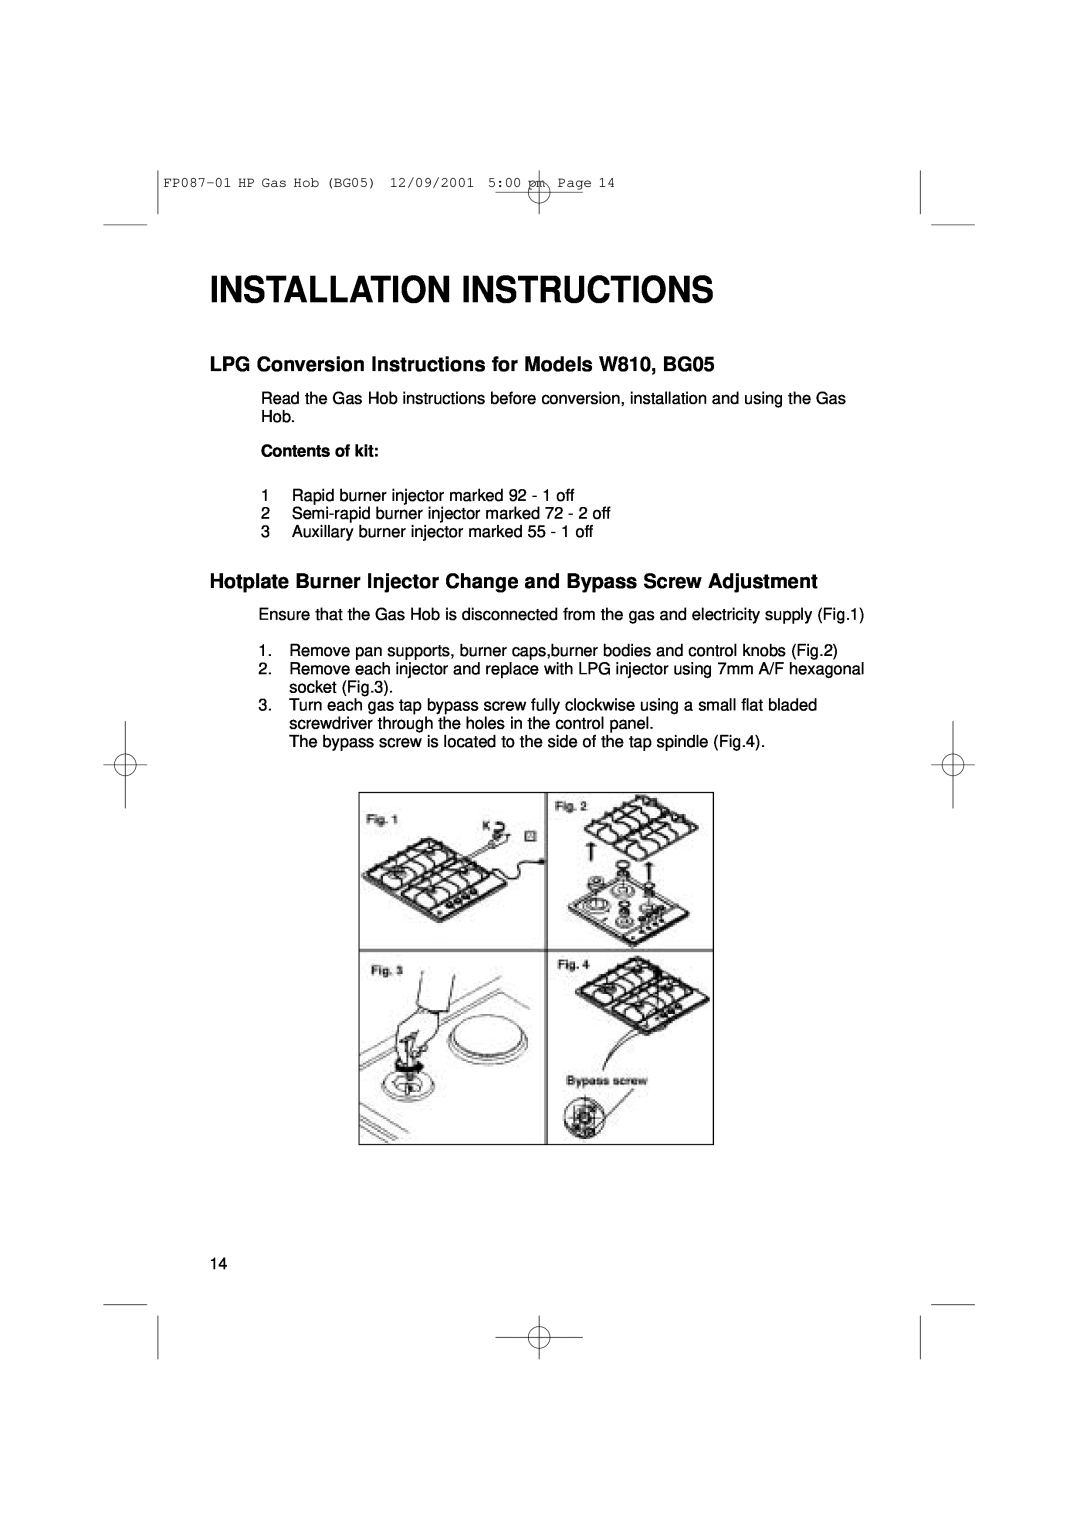 Hotpoint manual Installation Instructions, LPG Conversion Instructions for Models W810, BG05, Contents of kit 